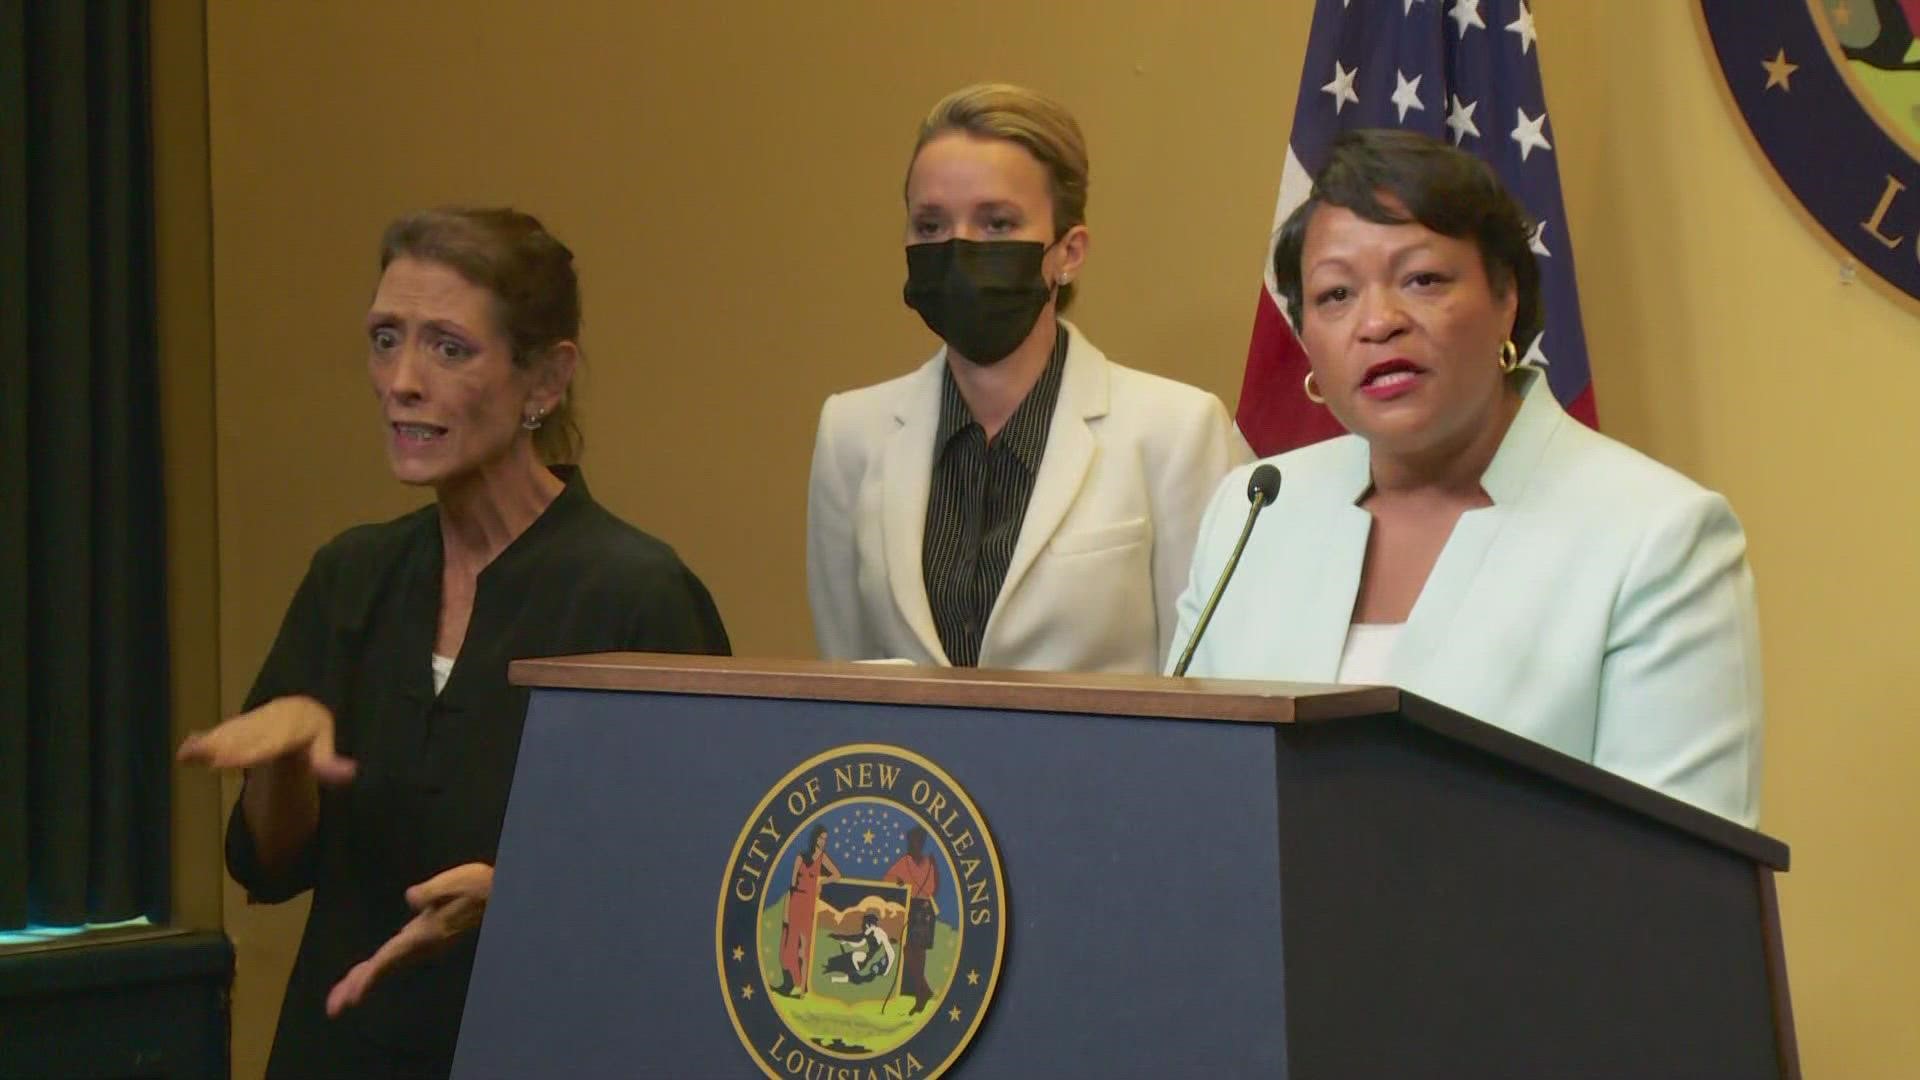 New Orleans Mayor Cantrell has issued a mandatory mask mandate for the city whether people are vaccinated or not.